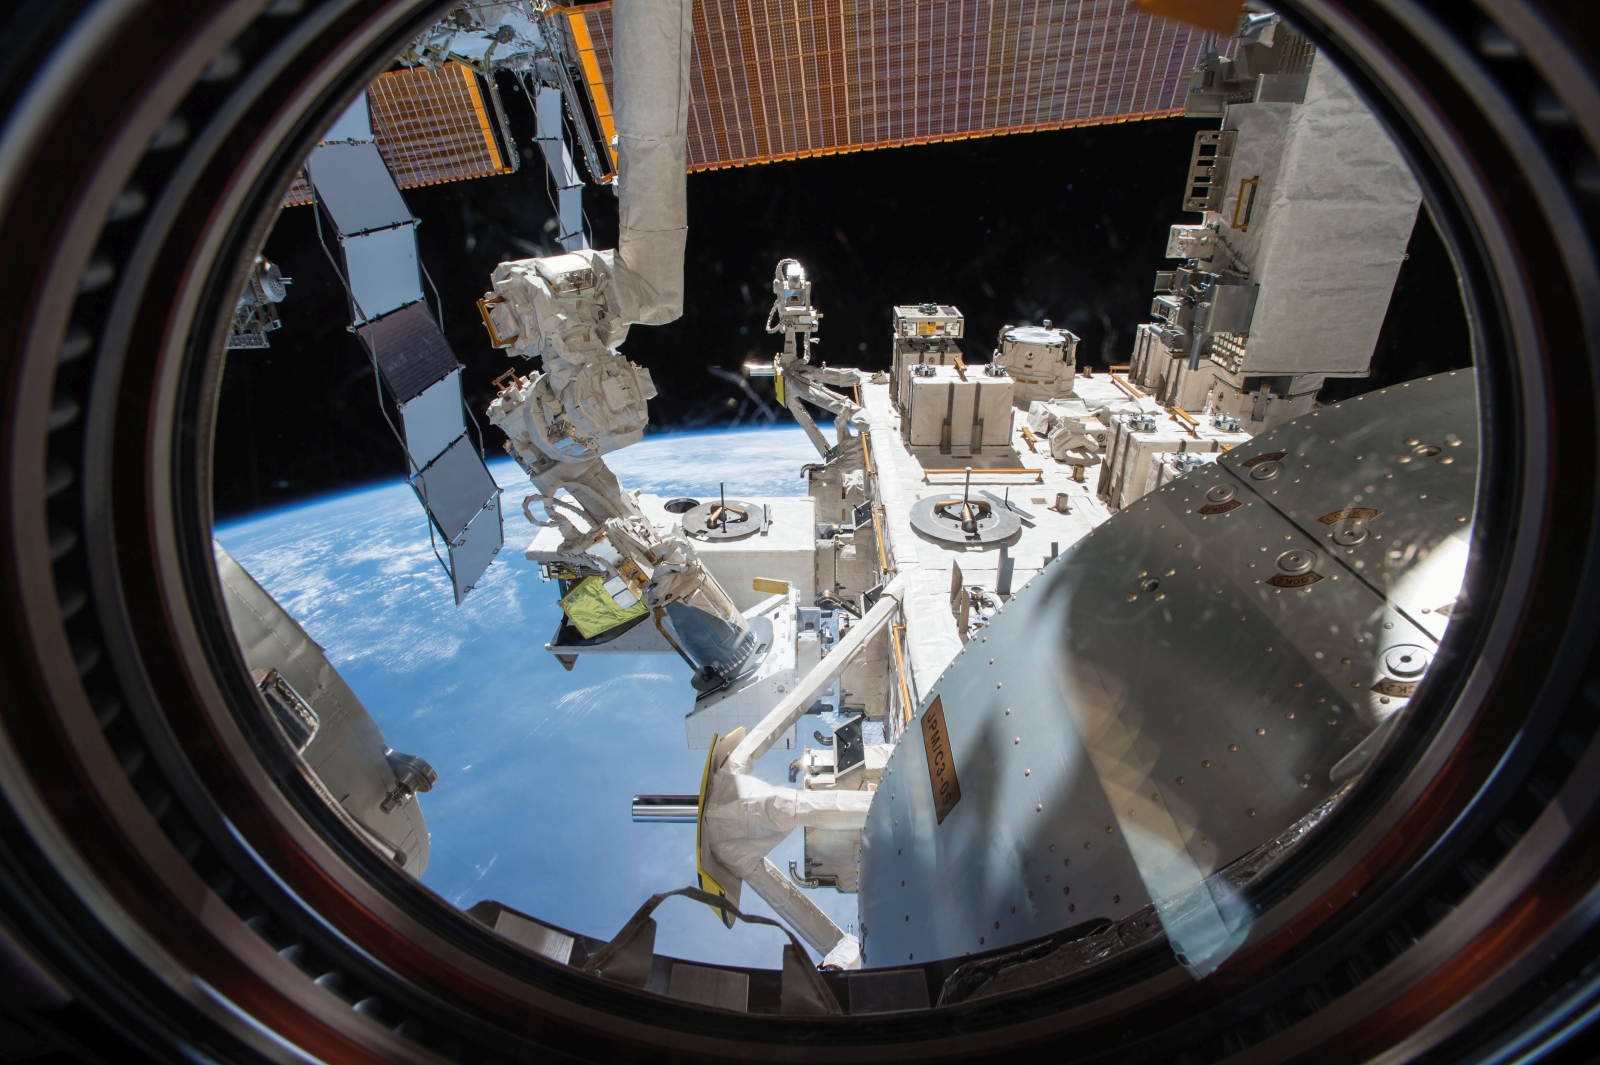 The sensor system to observe areas of the Earth will be installed aboard the International Space Station (ISS).